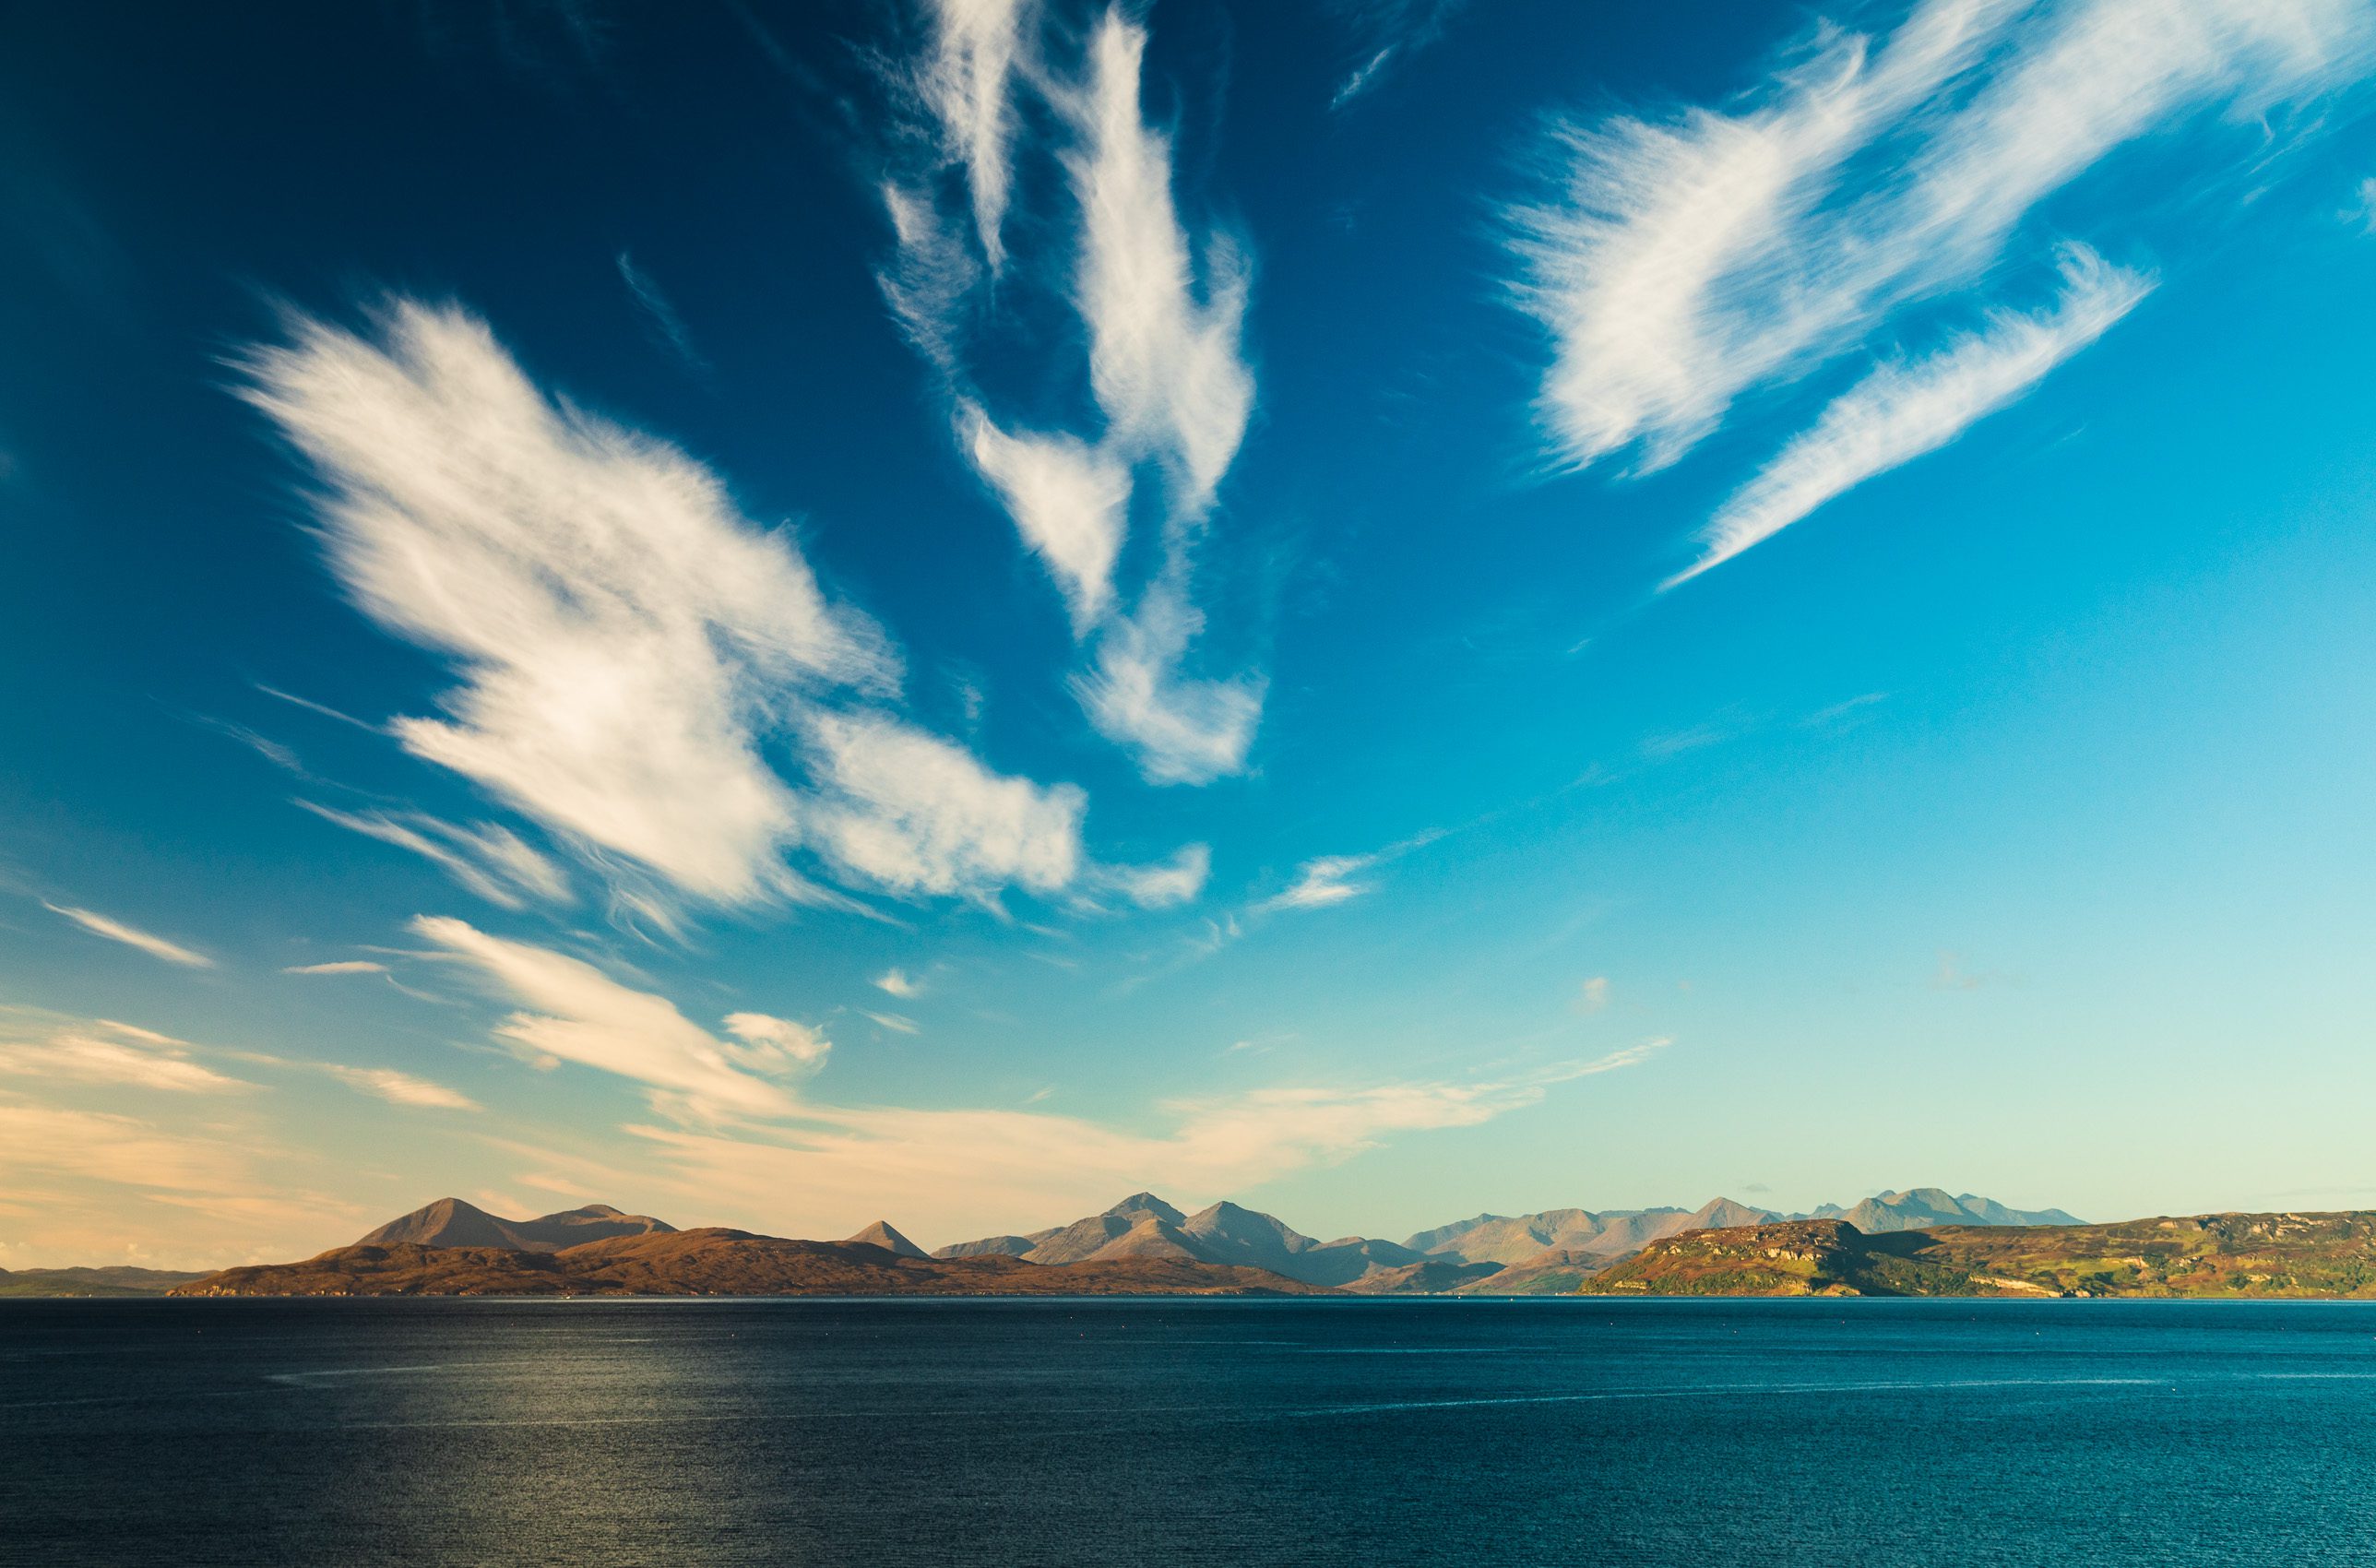 Wind-scattered cloud over Scalpay, Raasay and the Cuillins of Skye from Sand, Applecross, Scotland. AP013